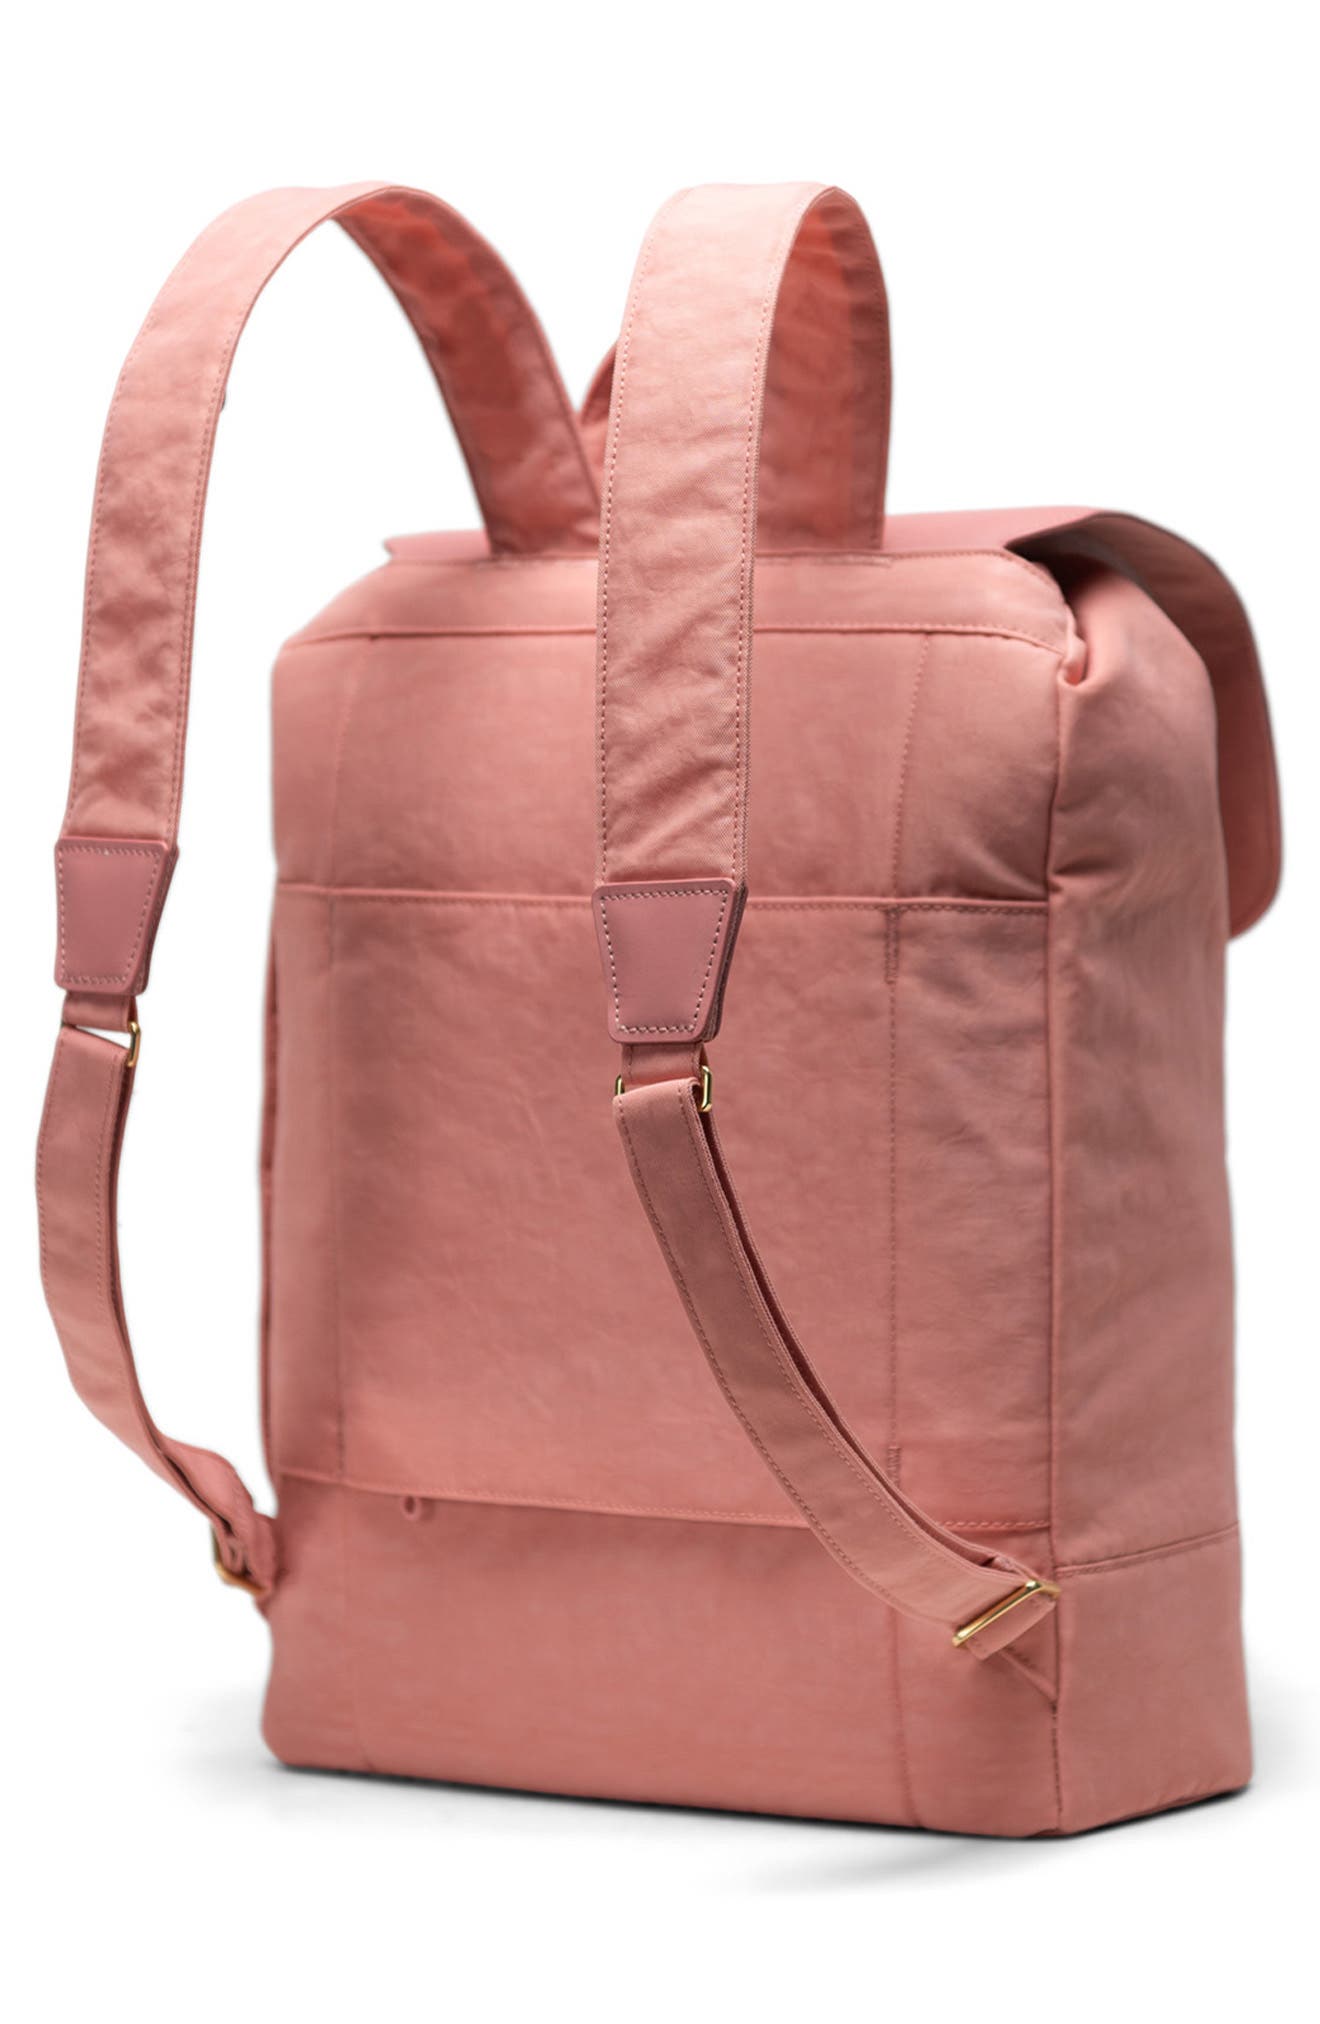 Herschel Supply Co. Orion Mini Backpack Bags Rosette : One Size